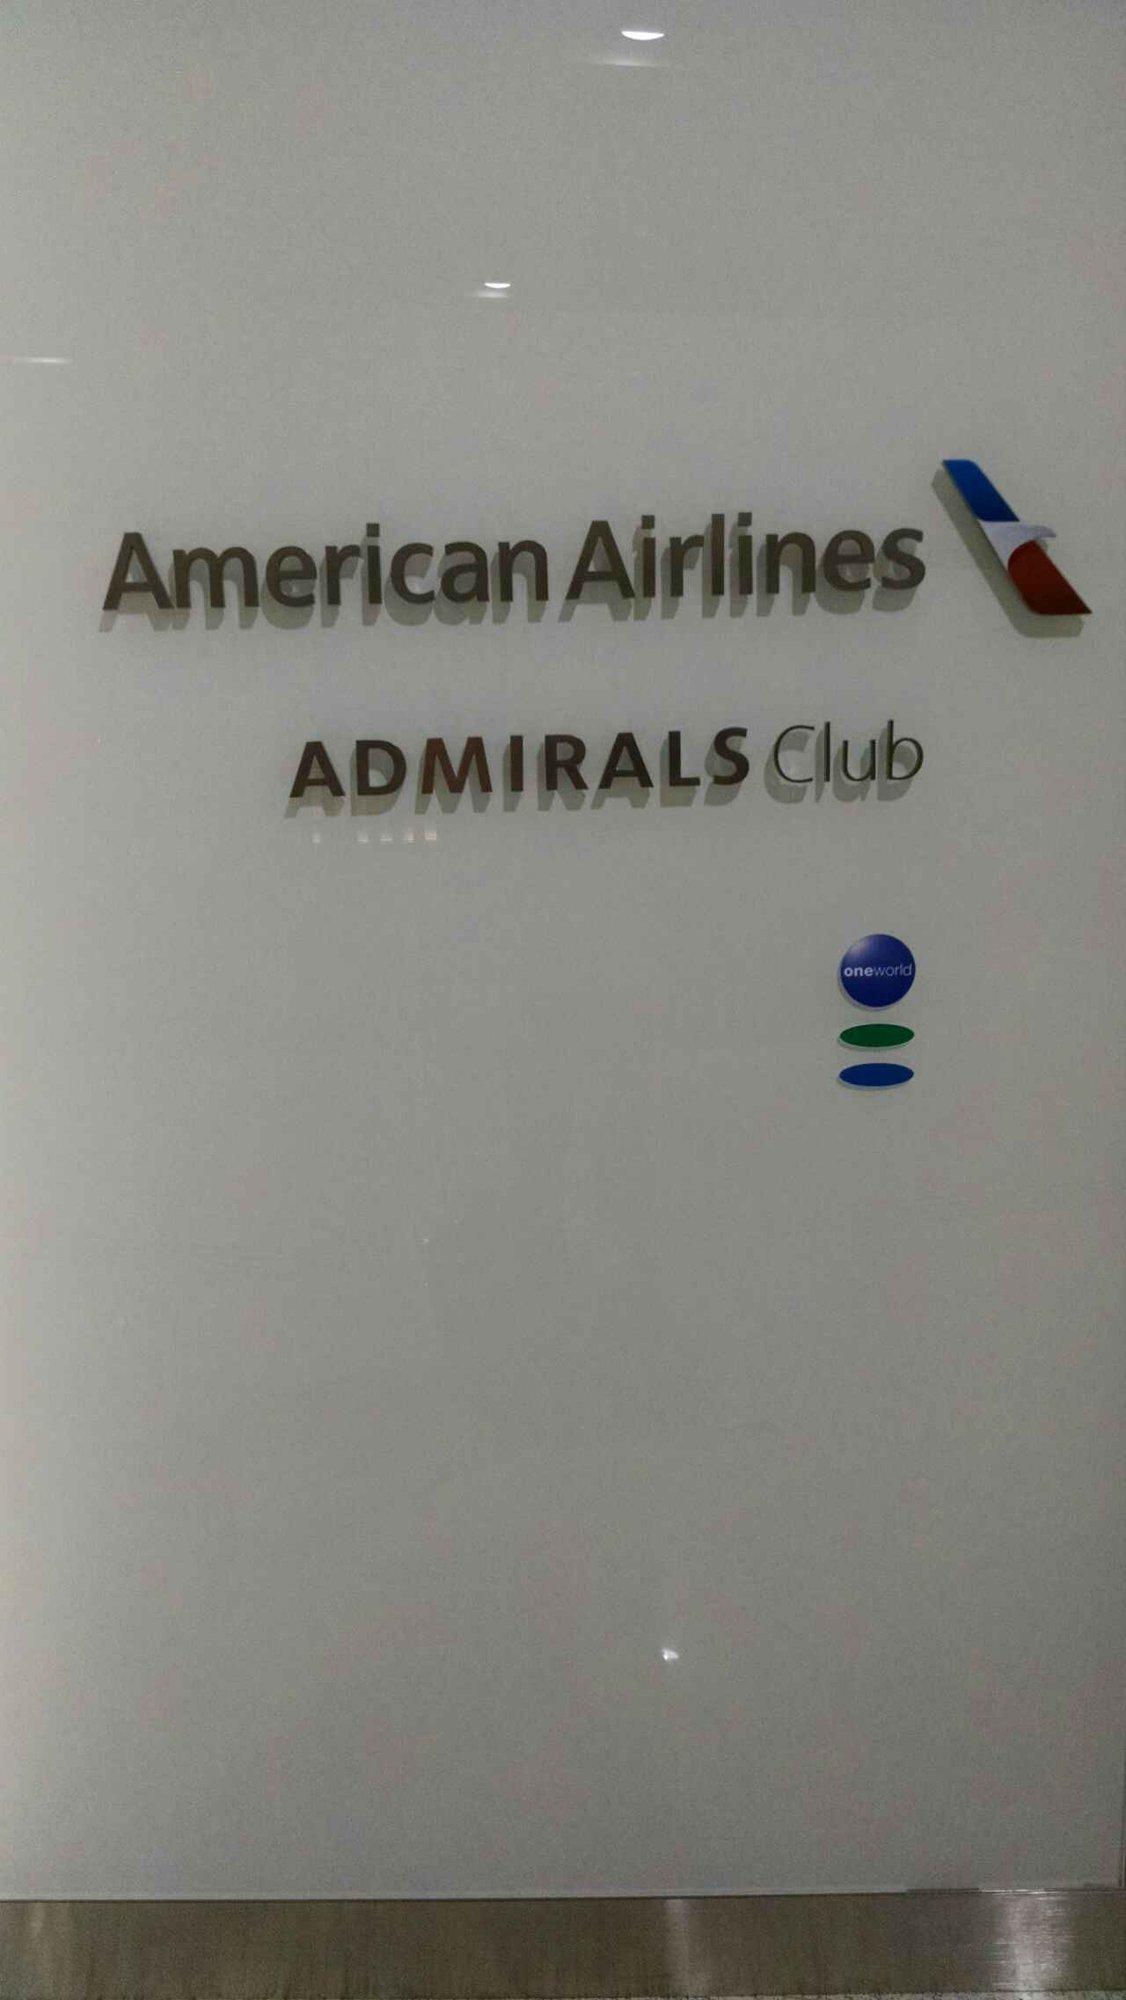 American Airlines Admirals Club image 23 of 30